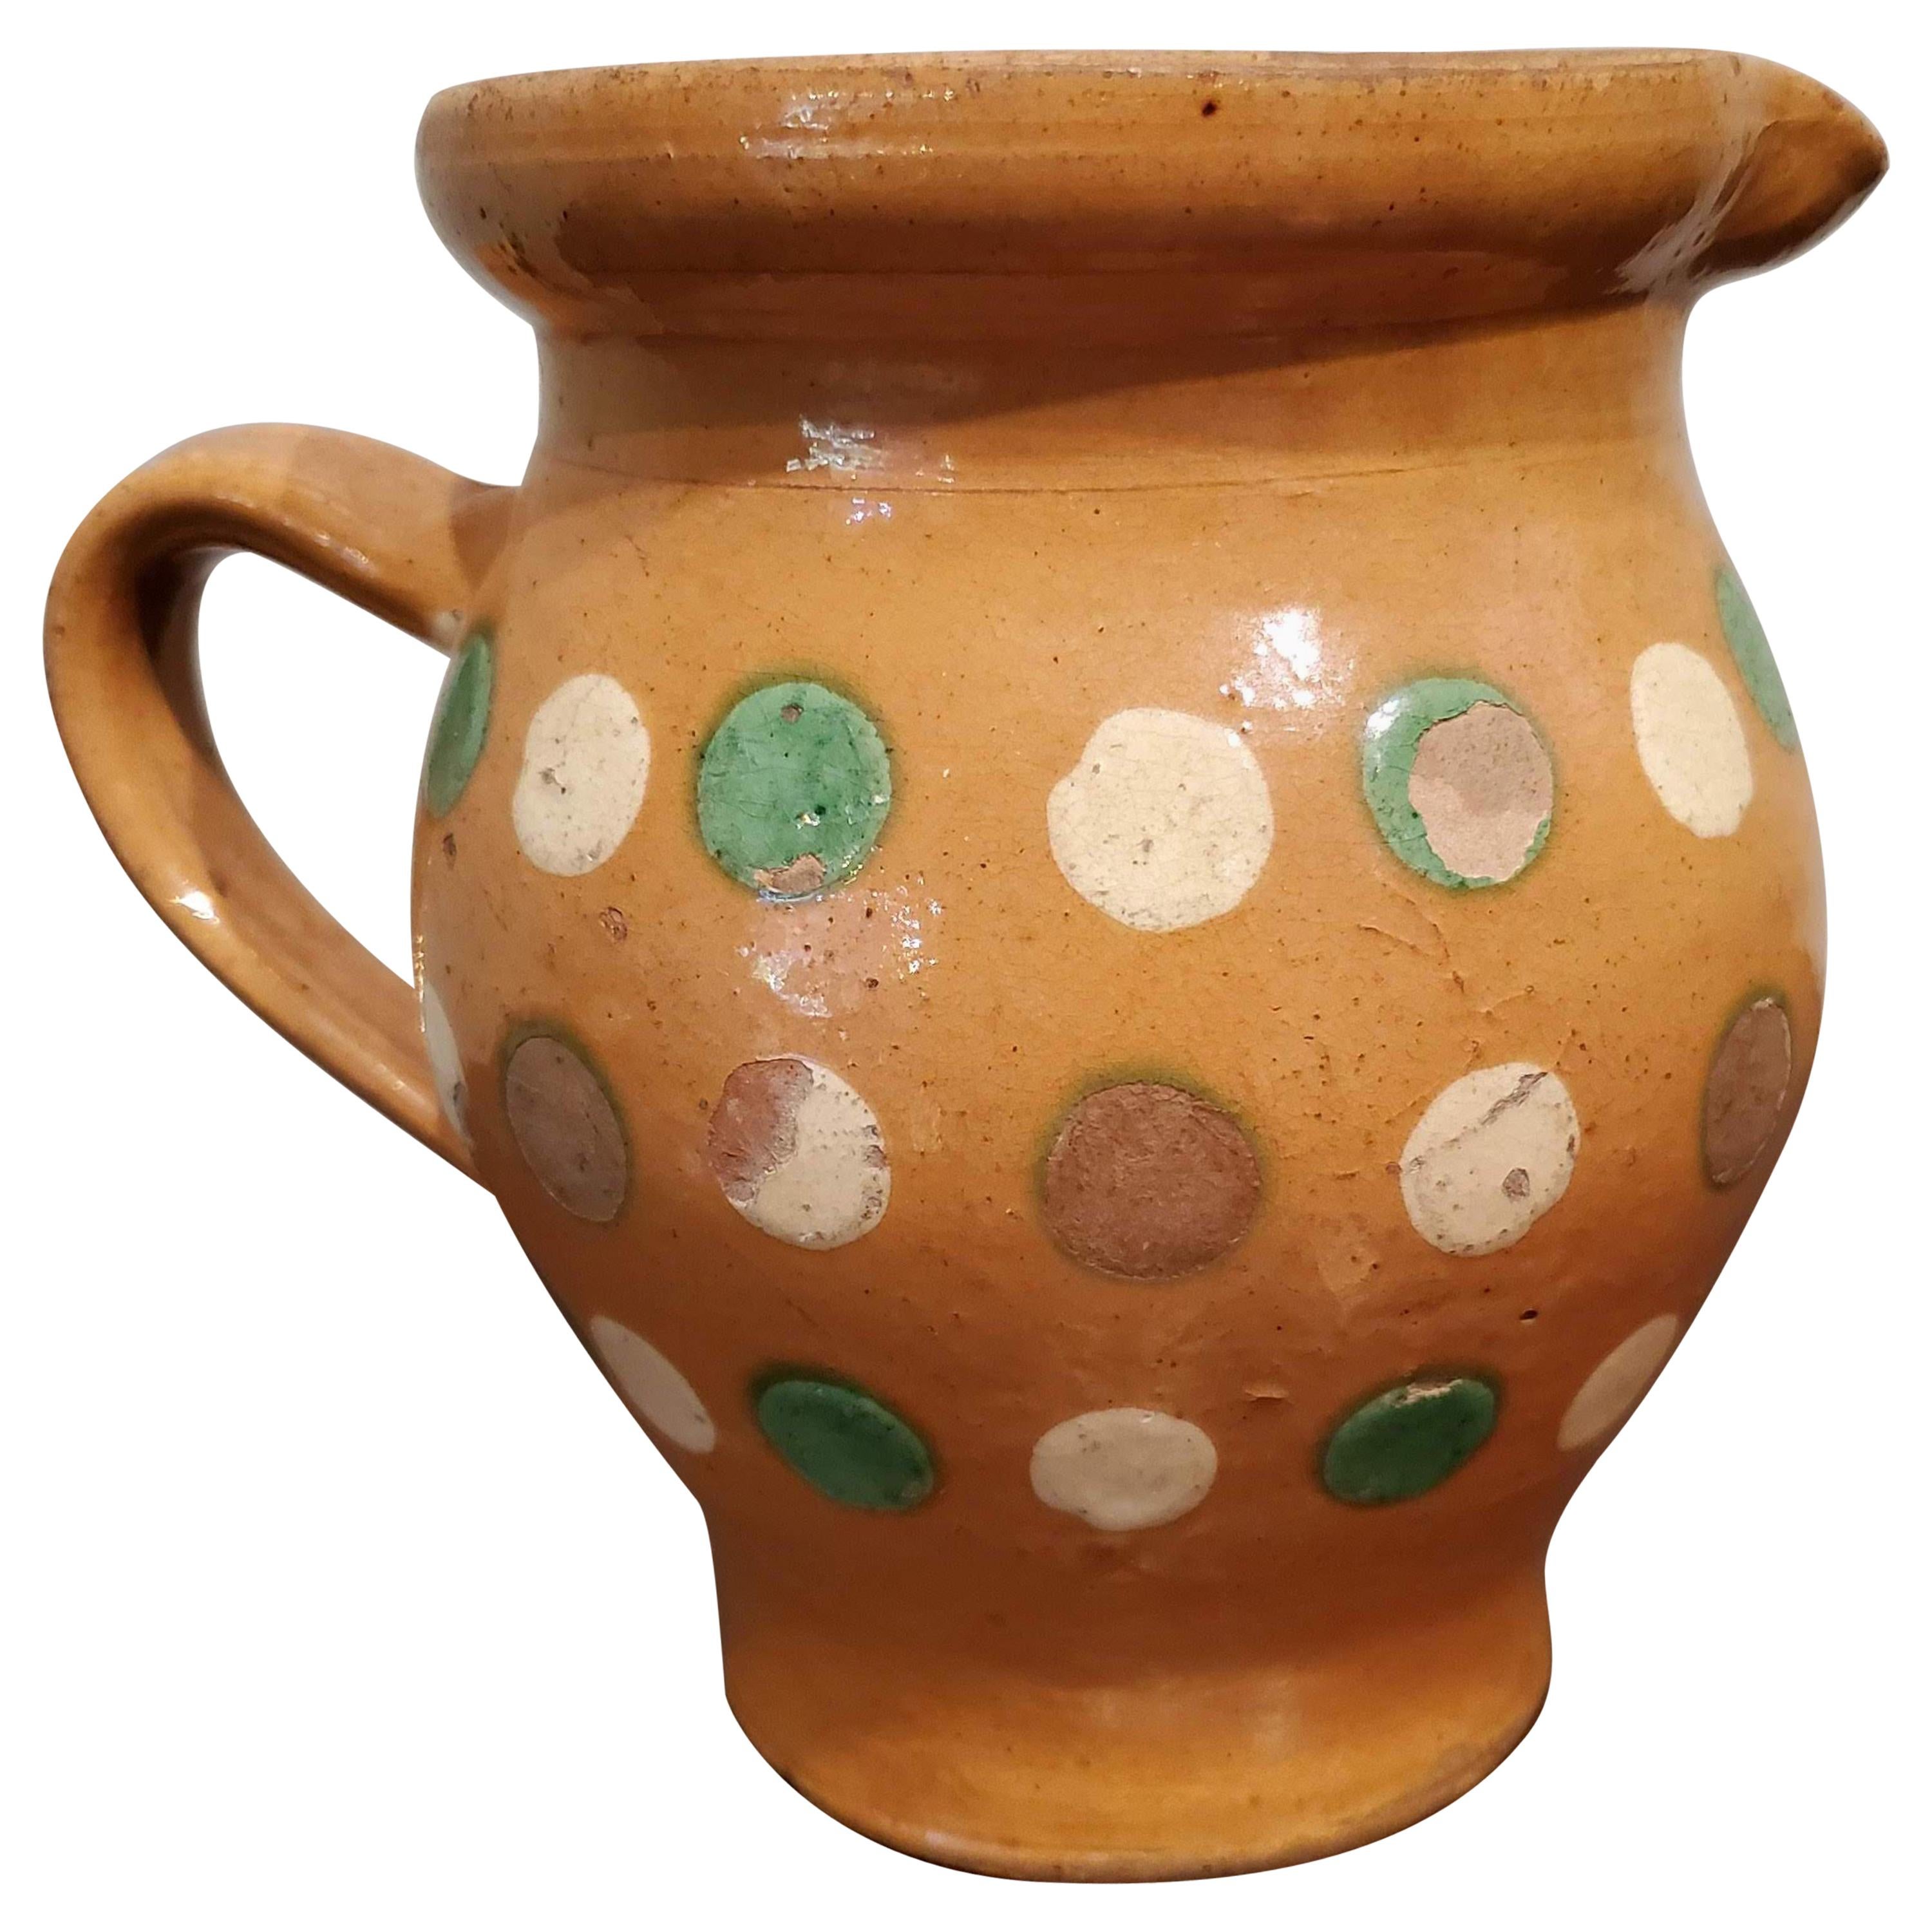 French Provincial Terracotta Milk Pitcher with Green and Cream Polka Dots